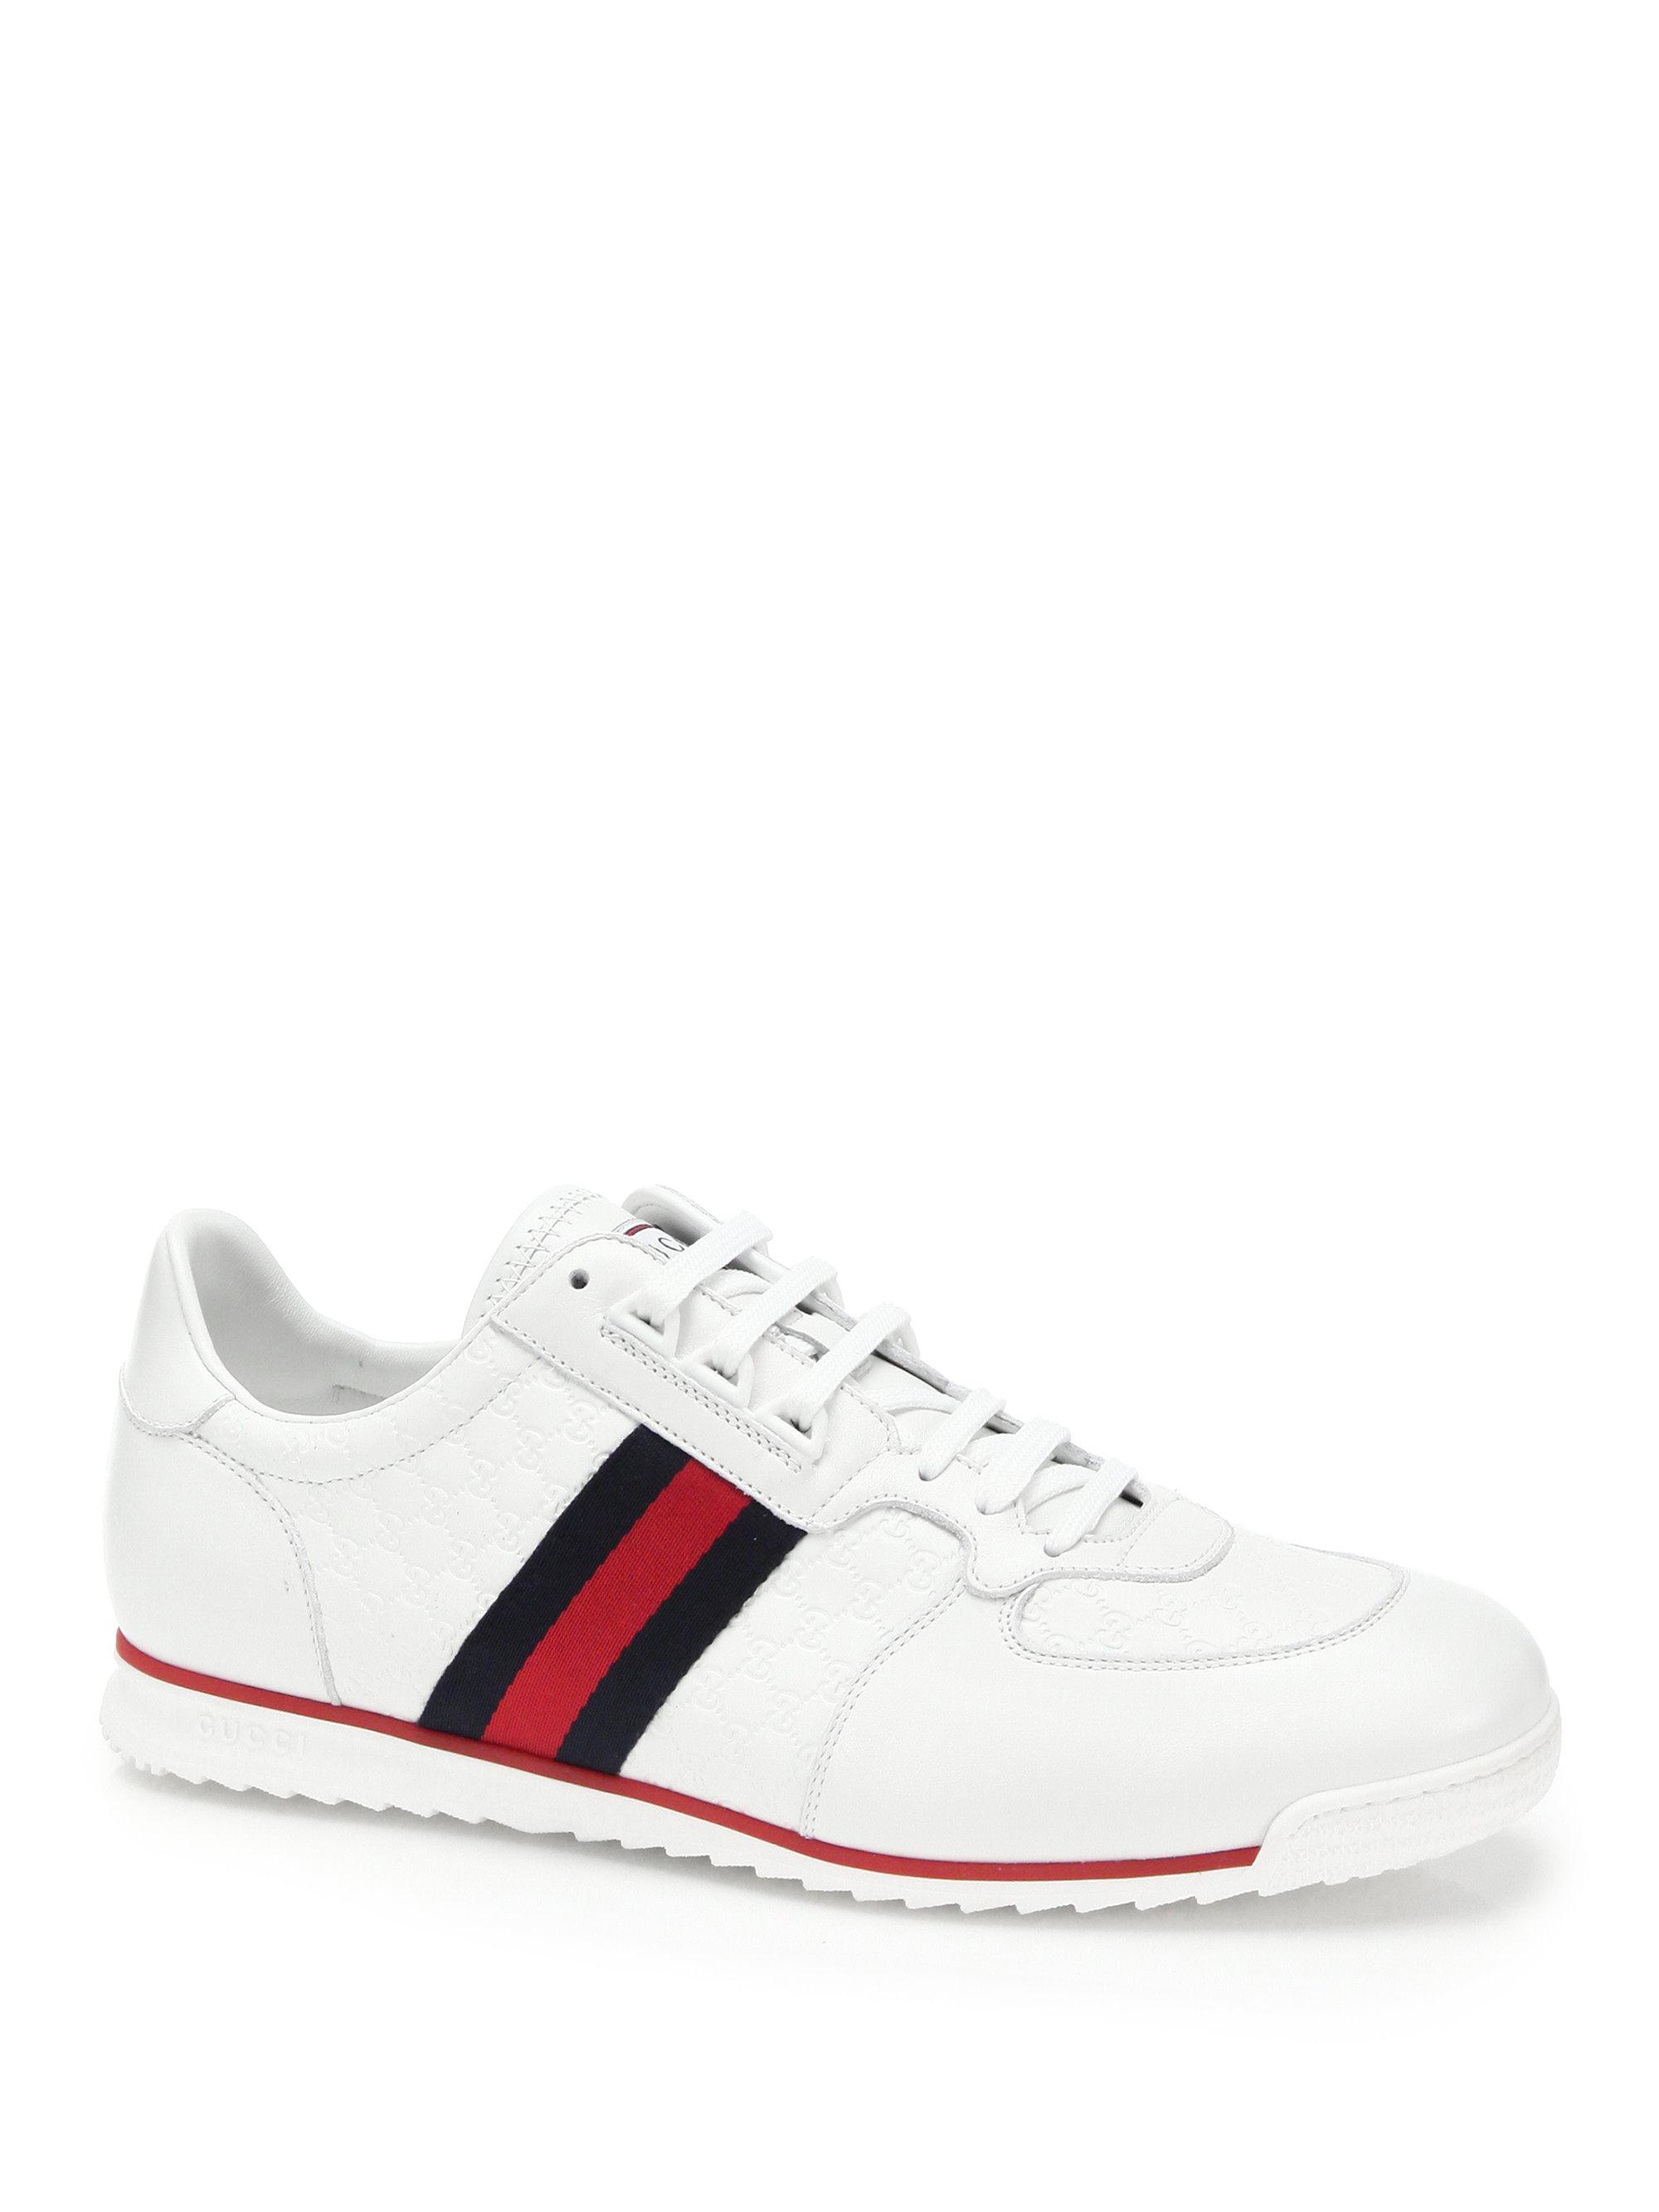 Lyst - Gucci Striped Leather Sneakers in Black for Men - Save 59%